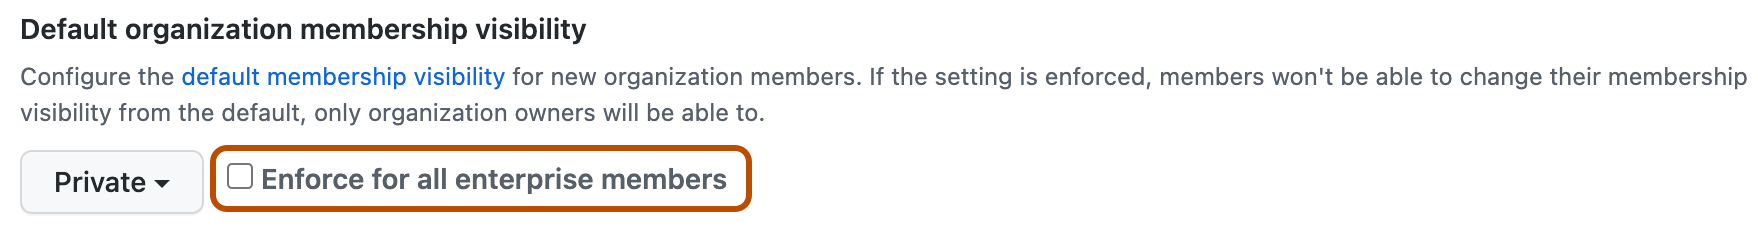 Checkbox to enforce the default setting on all members